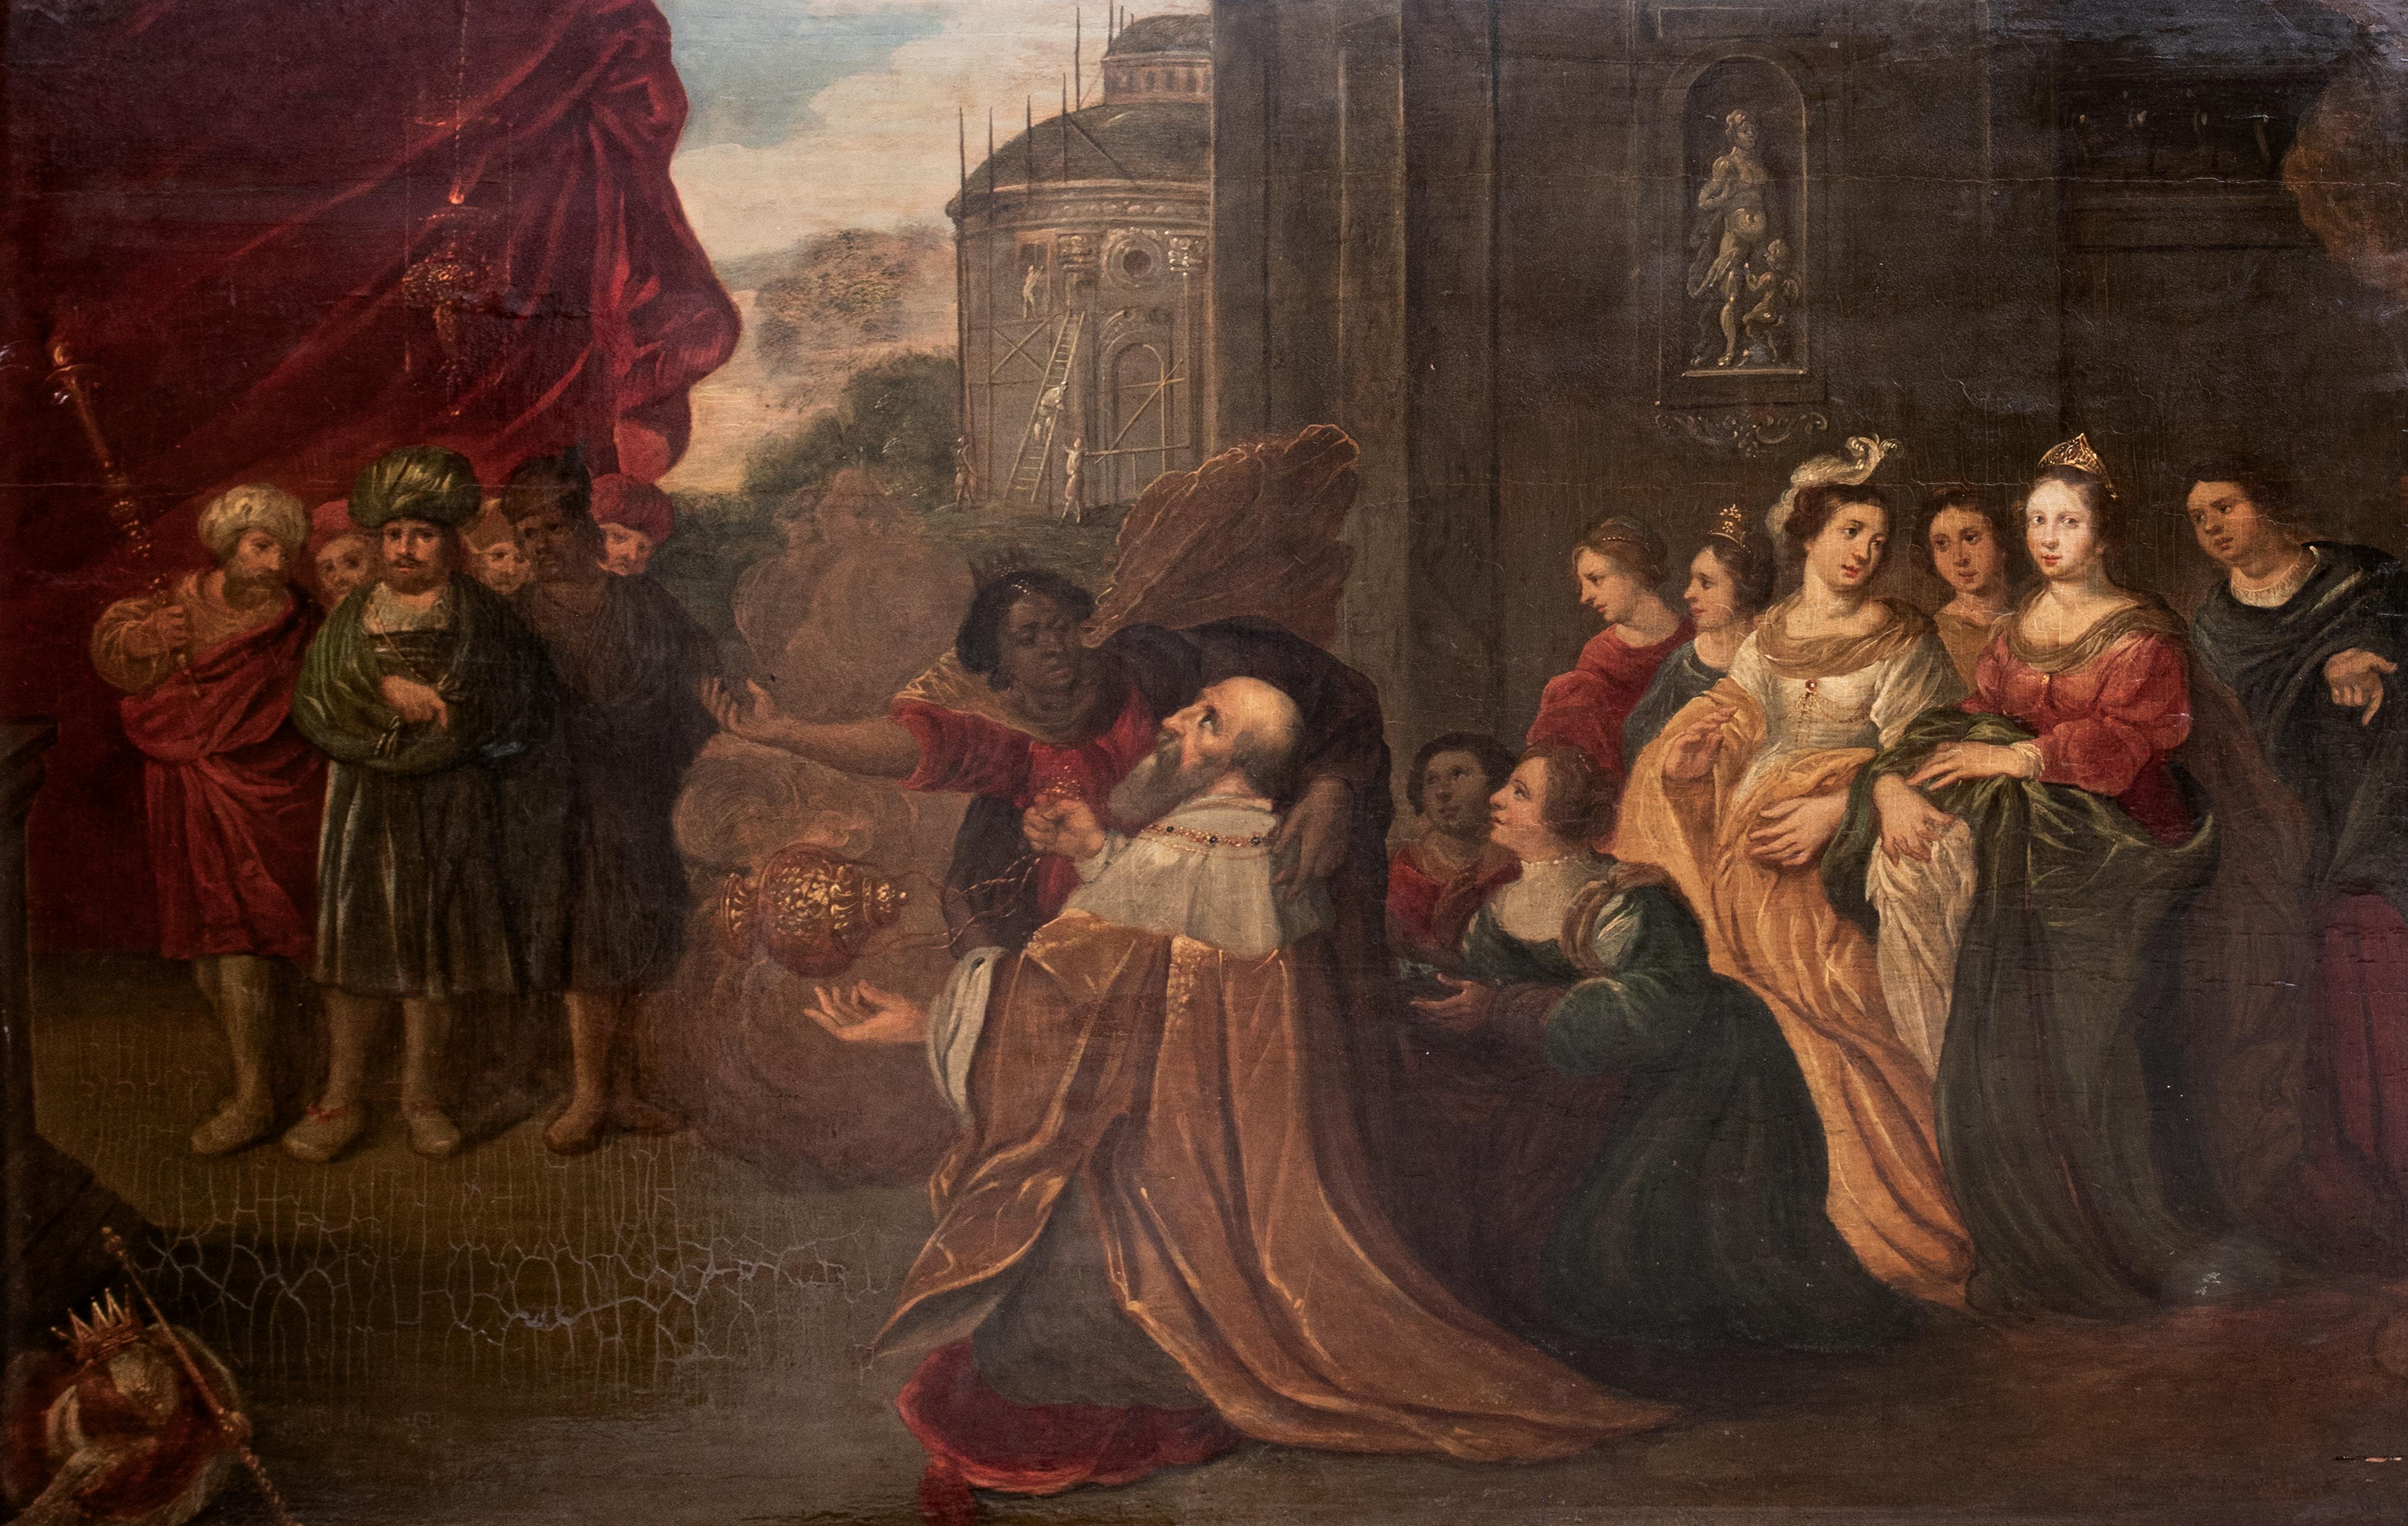 King Solomon Worshipping The Idols, 17th Century

FRANS FRANCKEN II (1581-1642) - signed sales to $6,000,000

Large 17th Century biblical account of King Solomon worshipping the Idols, oil on panel Frans Francken. Excellent quality and condition Old